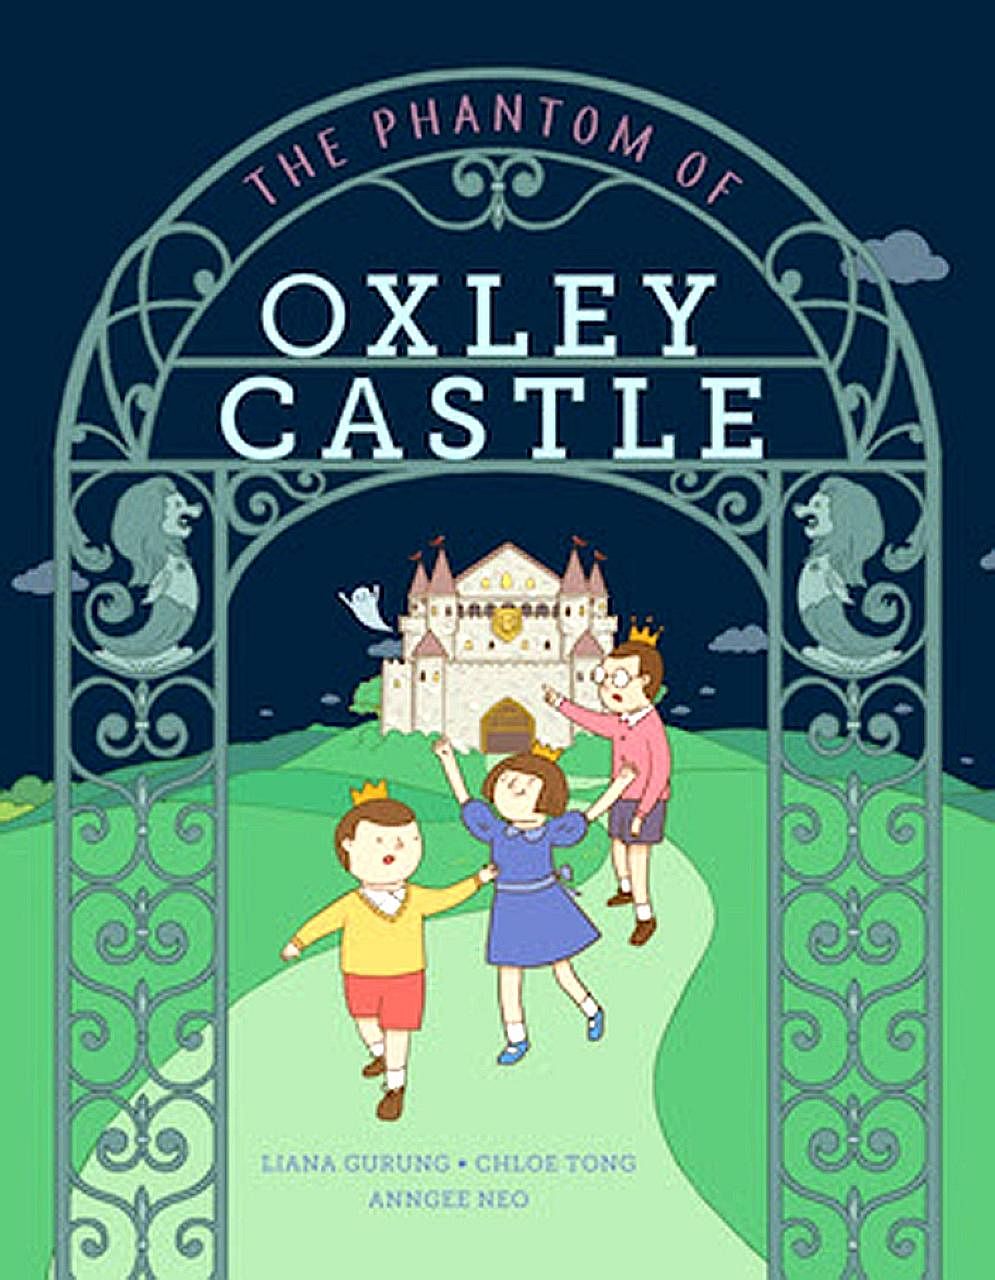 The Phantom Of Oxley Castle was supposed to have been launched on Saturday.